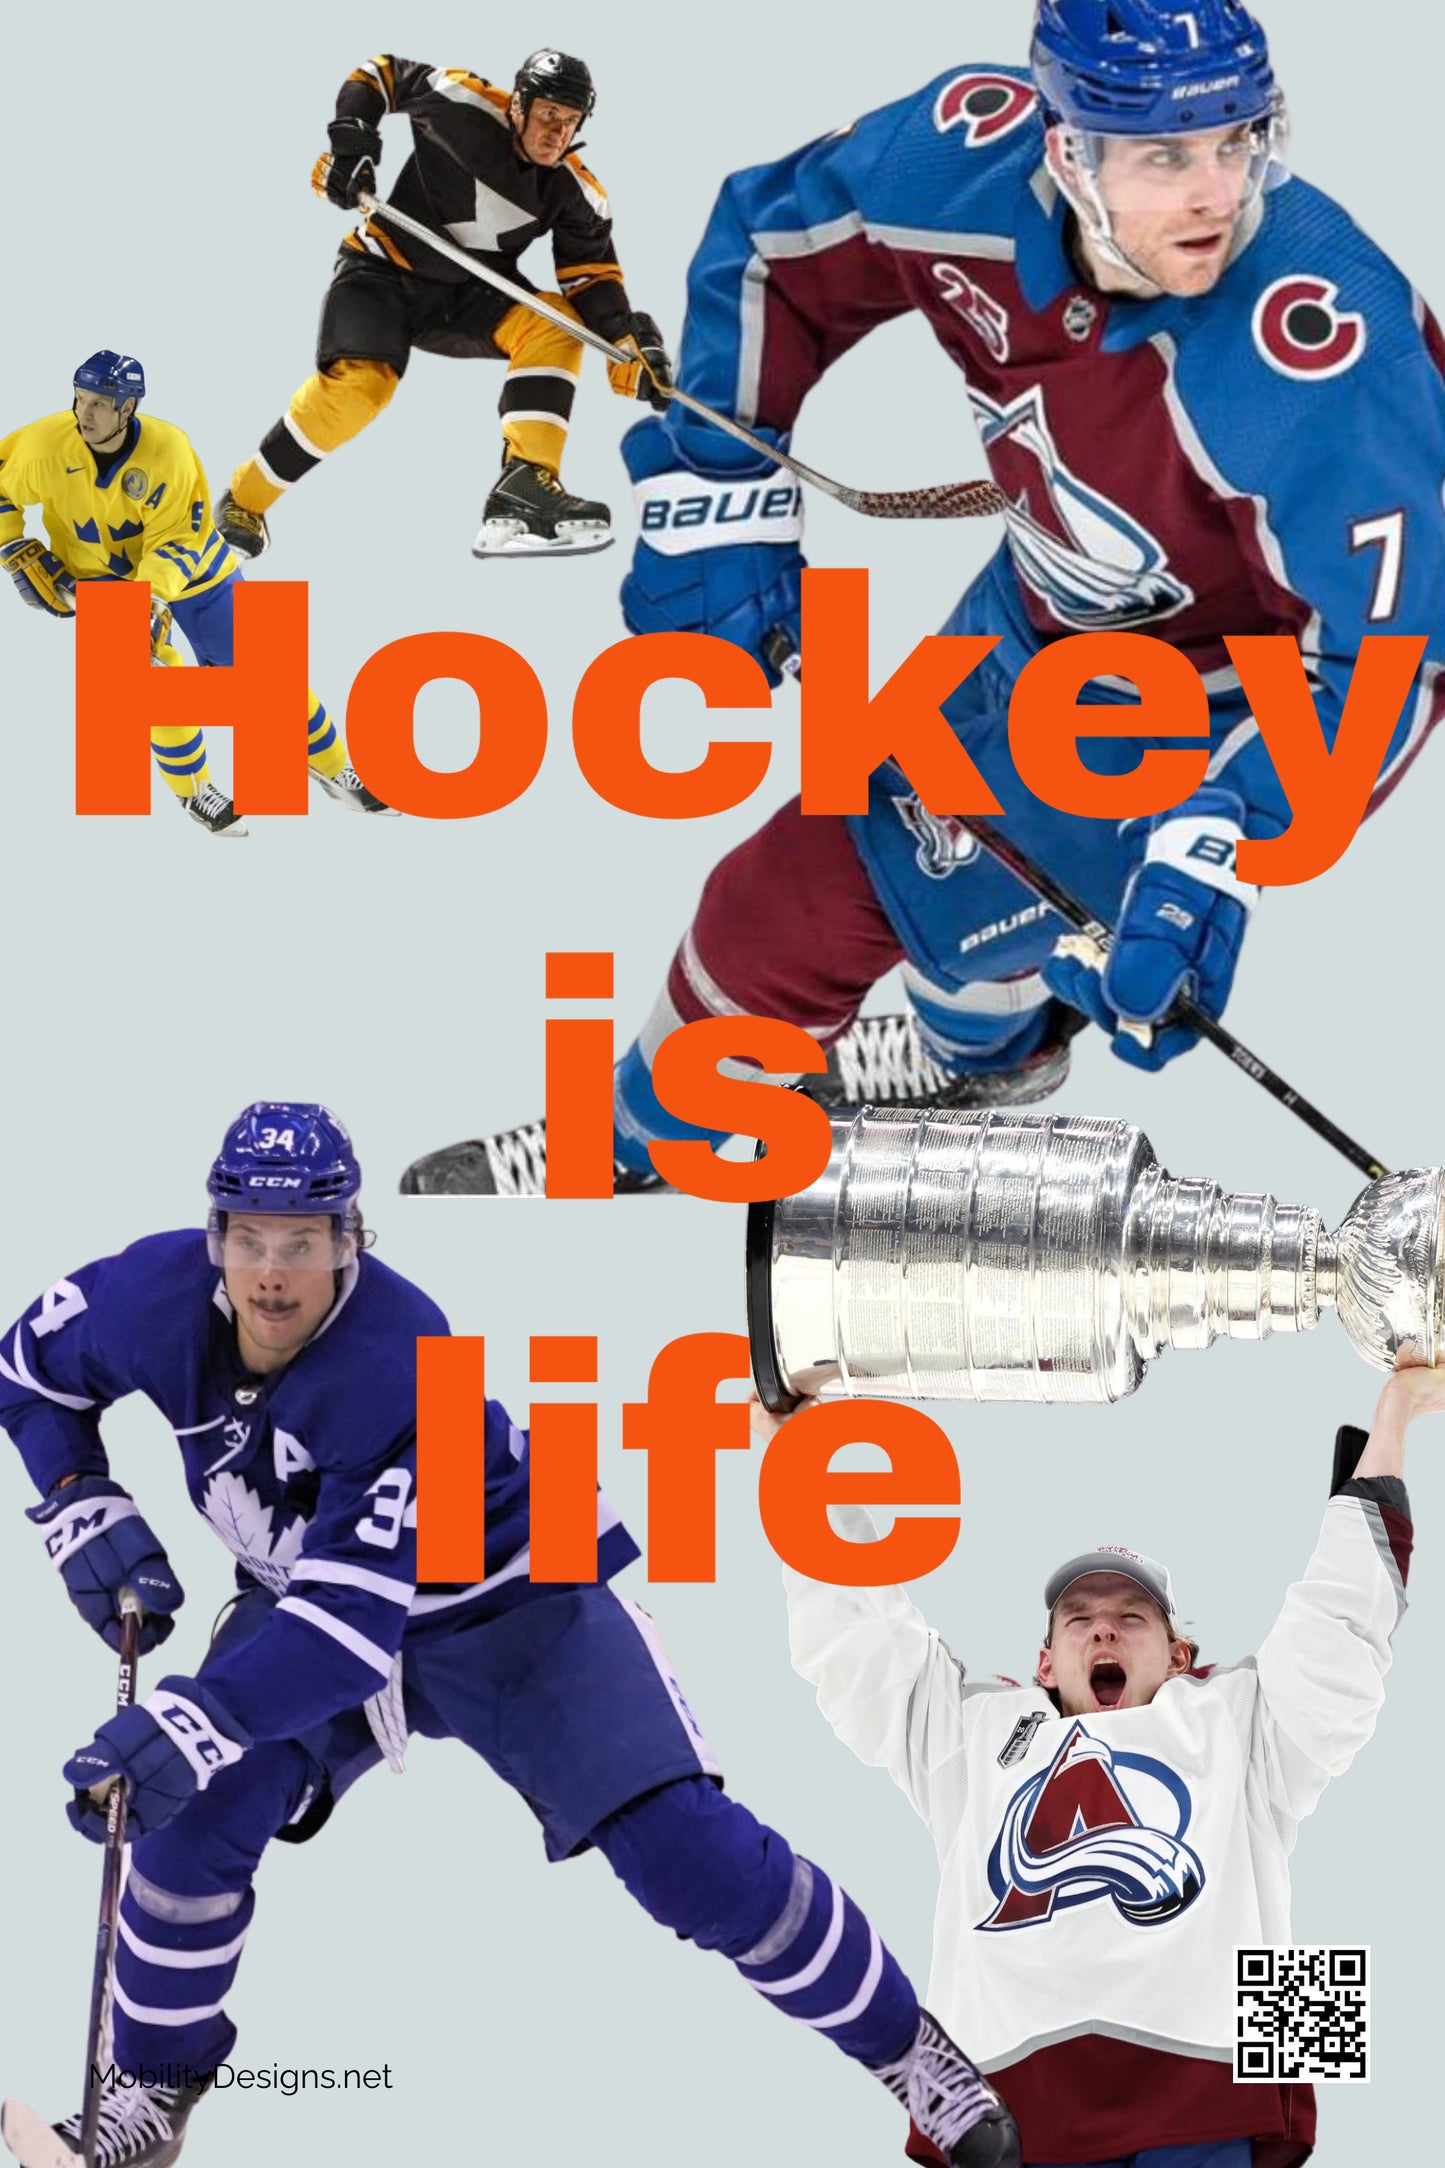 Hockey scooter banner